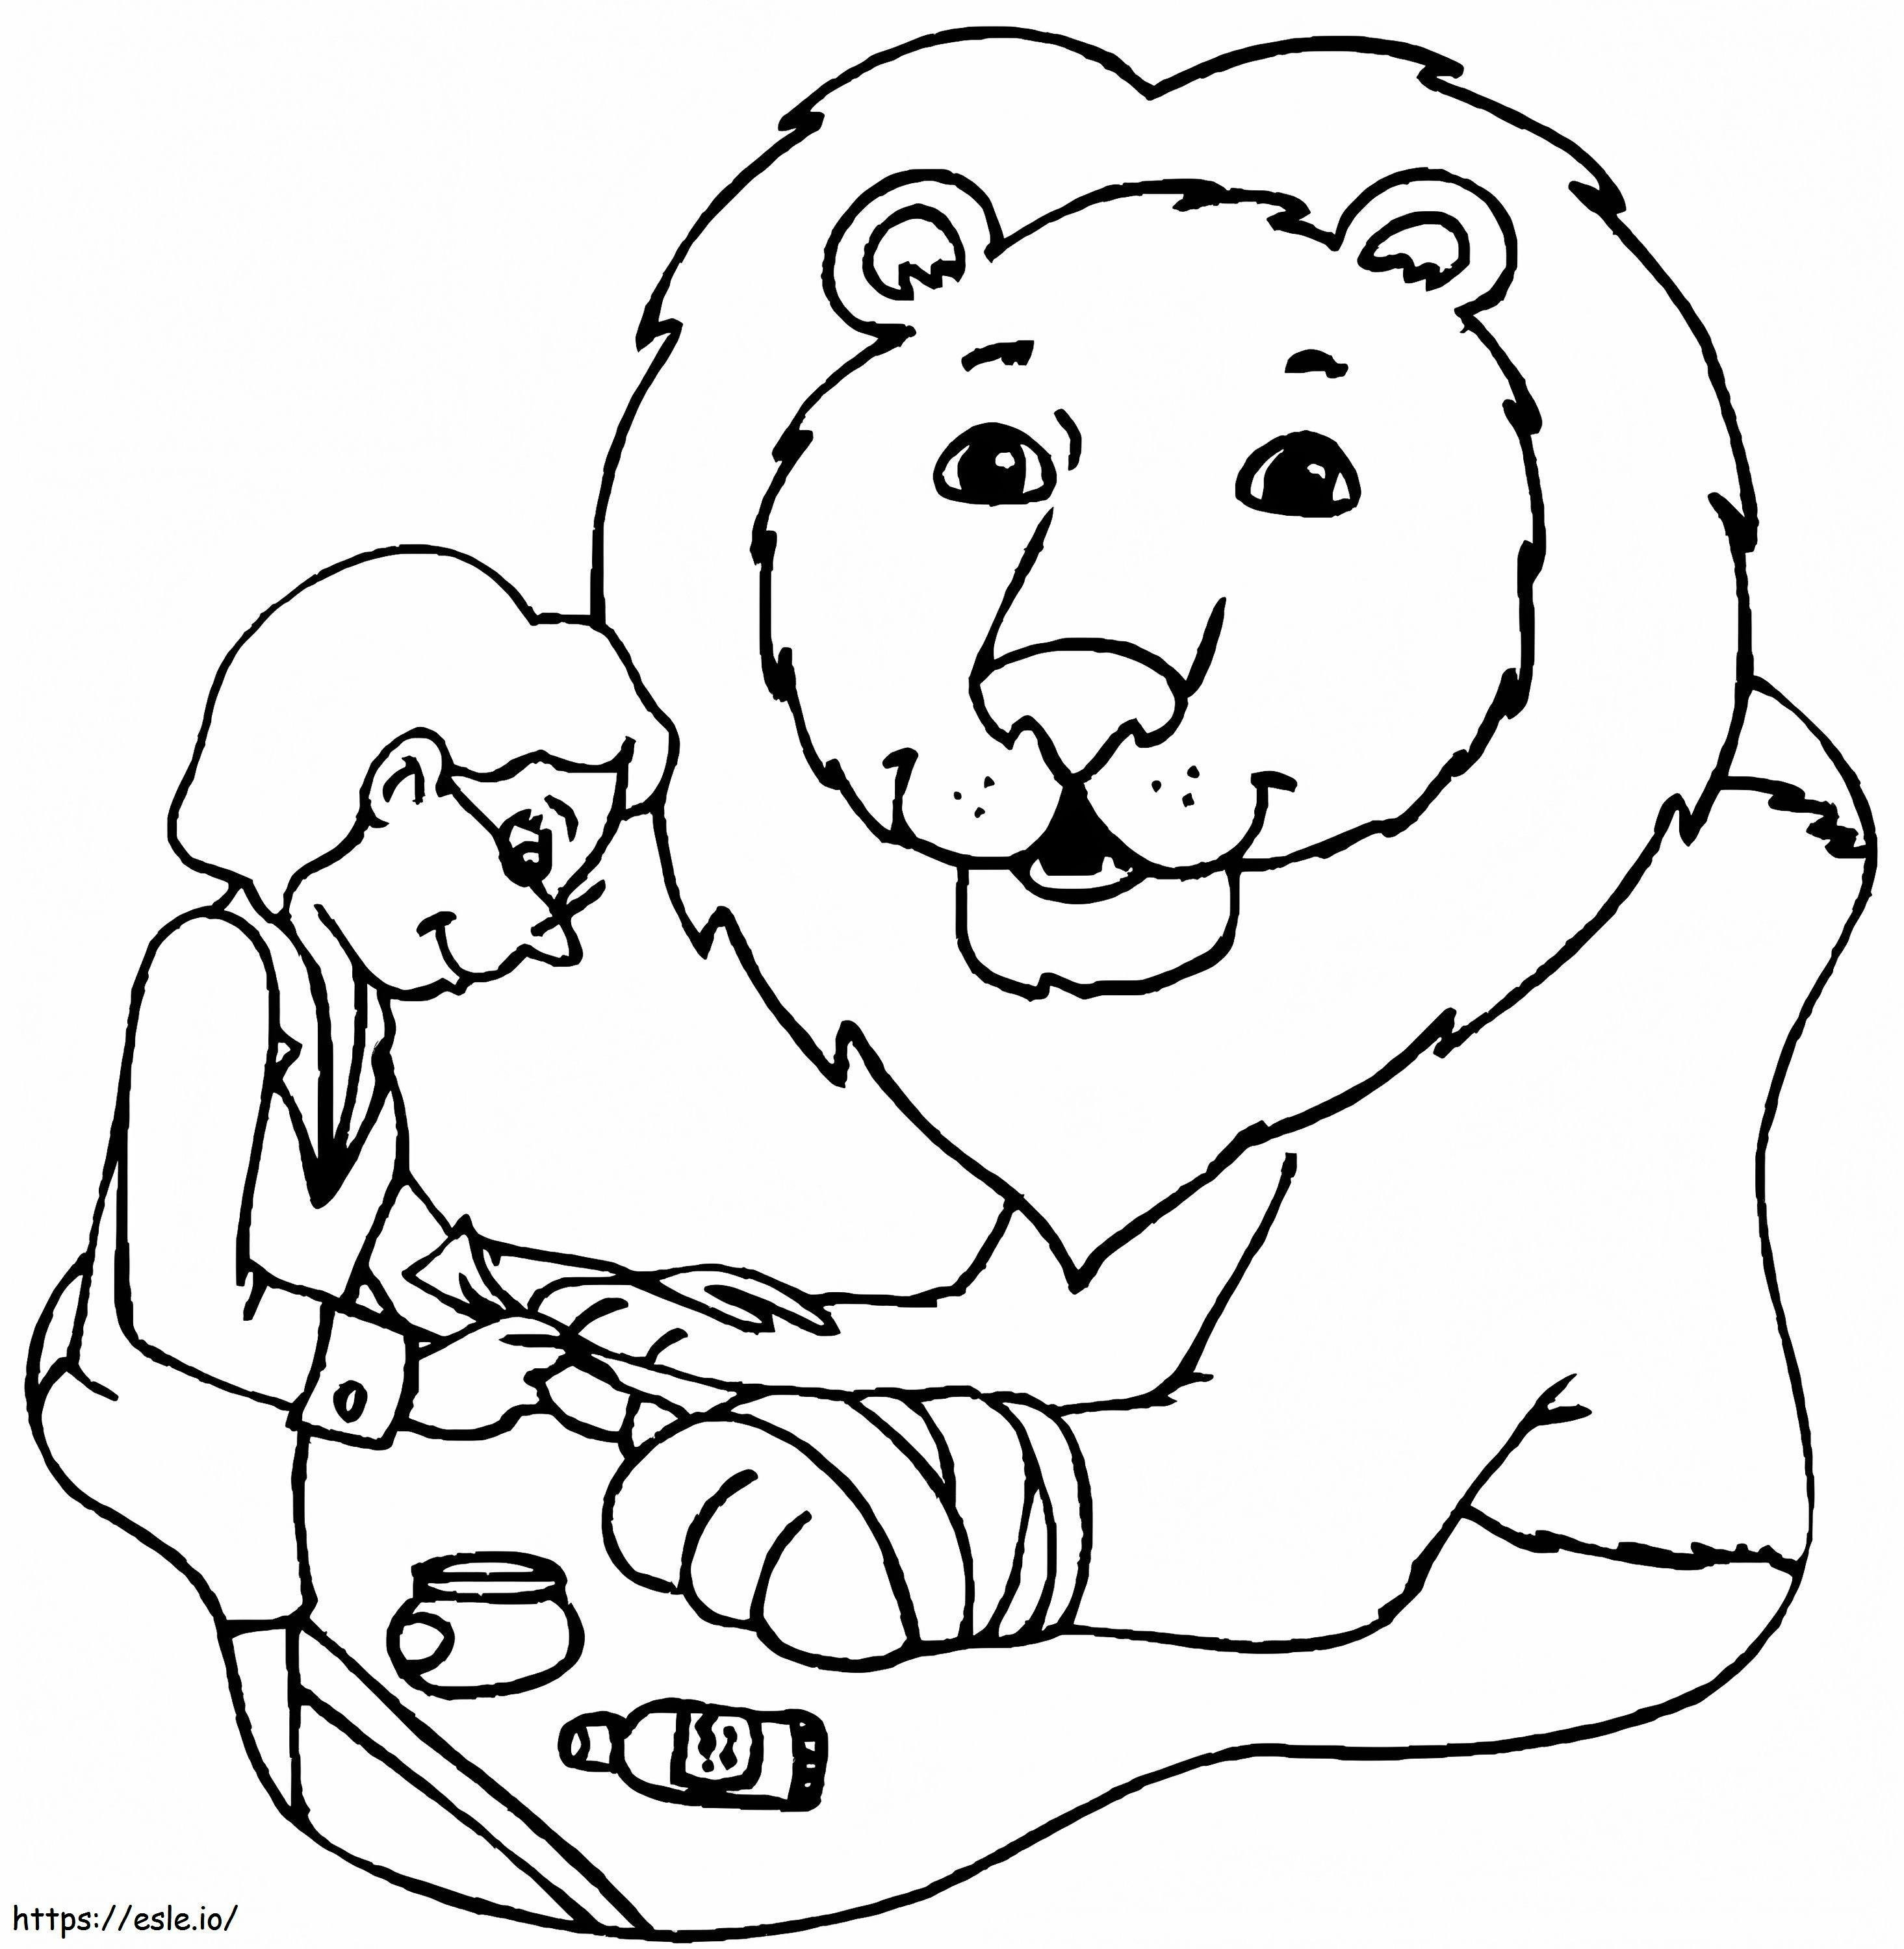 Veterinarian And A Lion coloring page